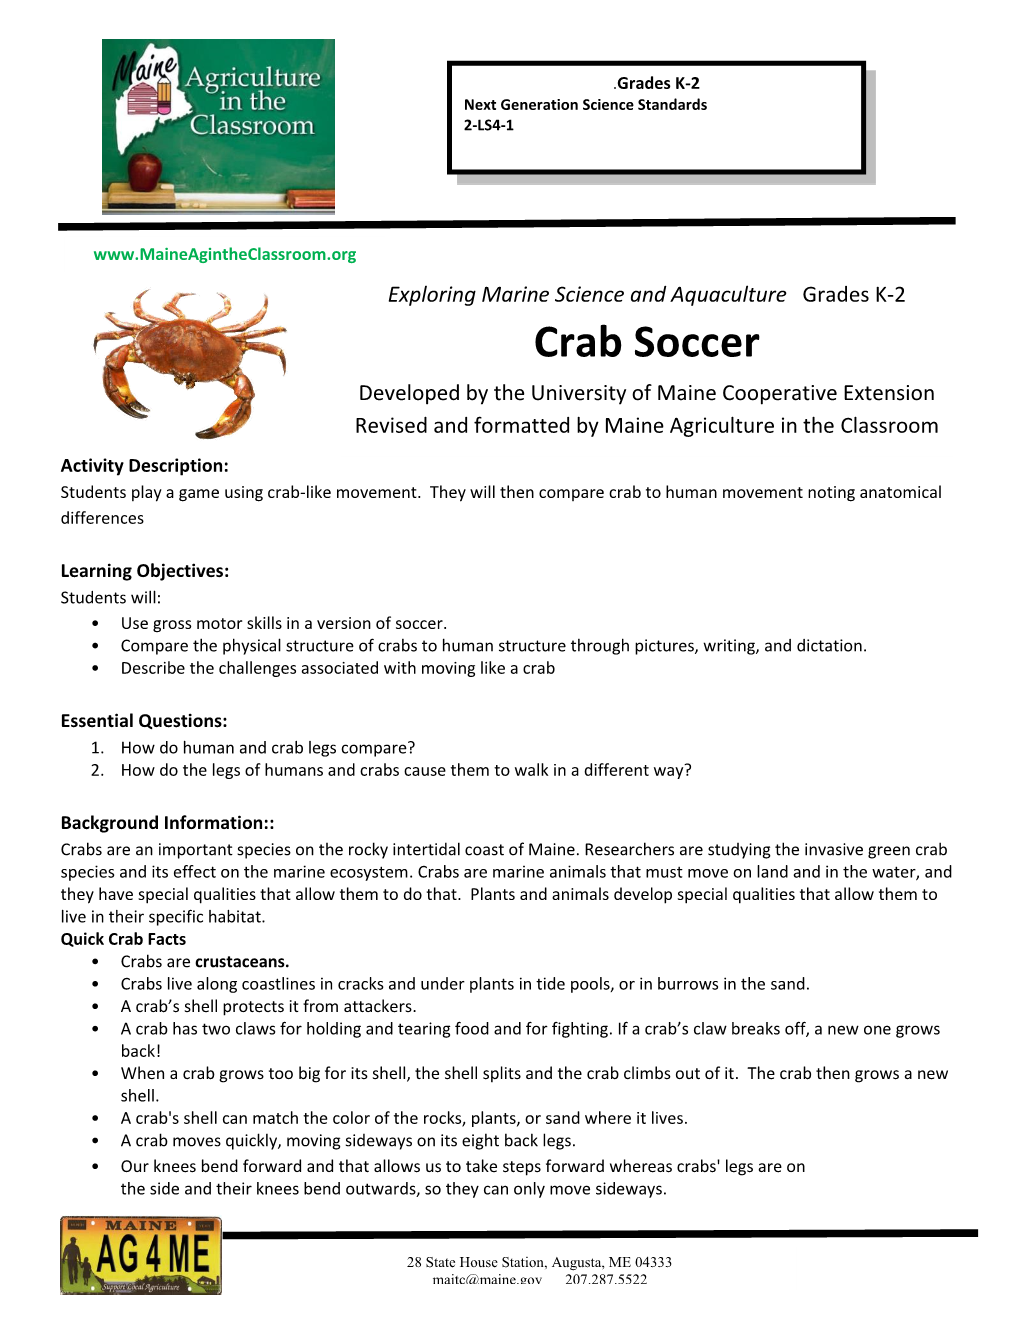 Crab Soccer Developed by the University of Maine Cooperative Extension